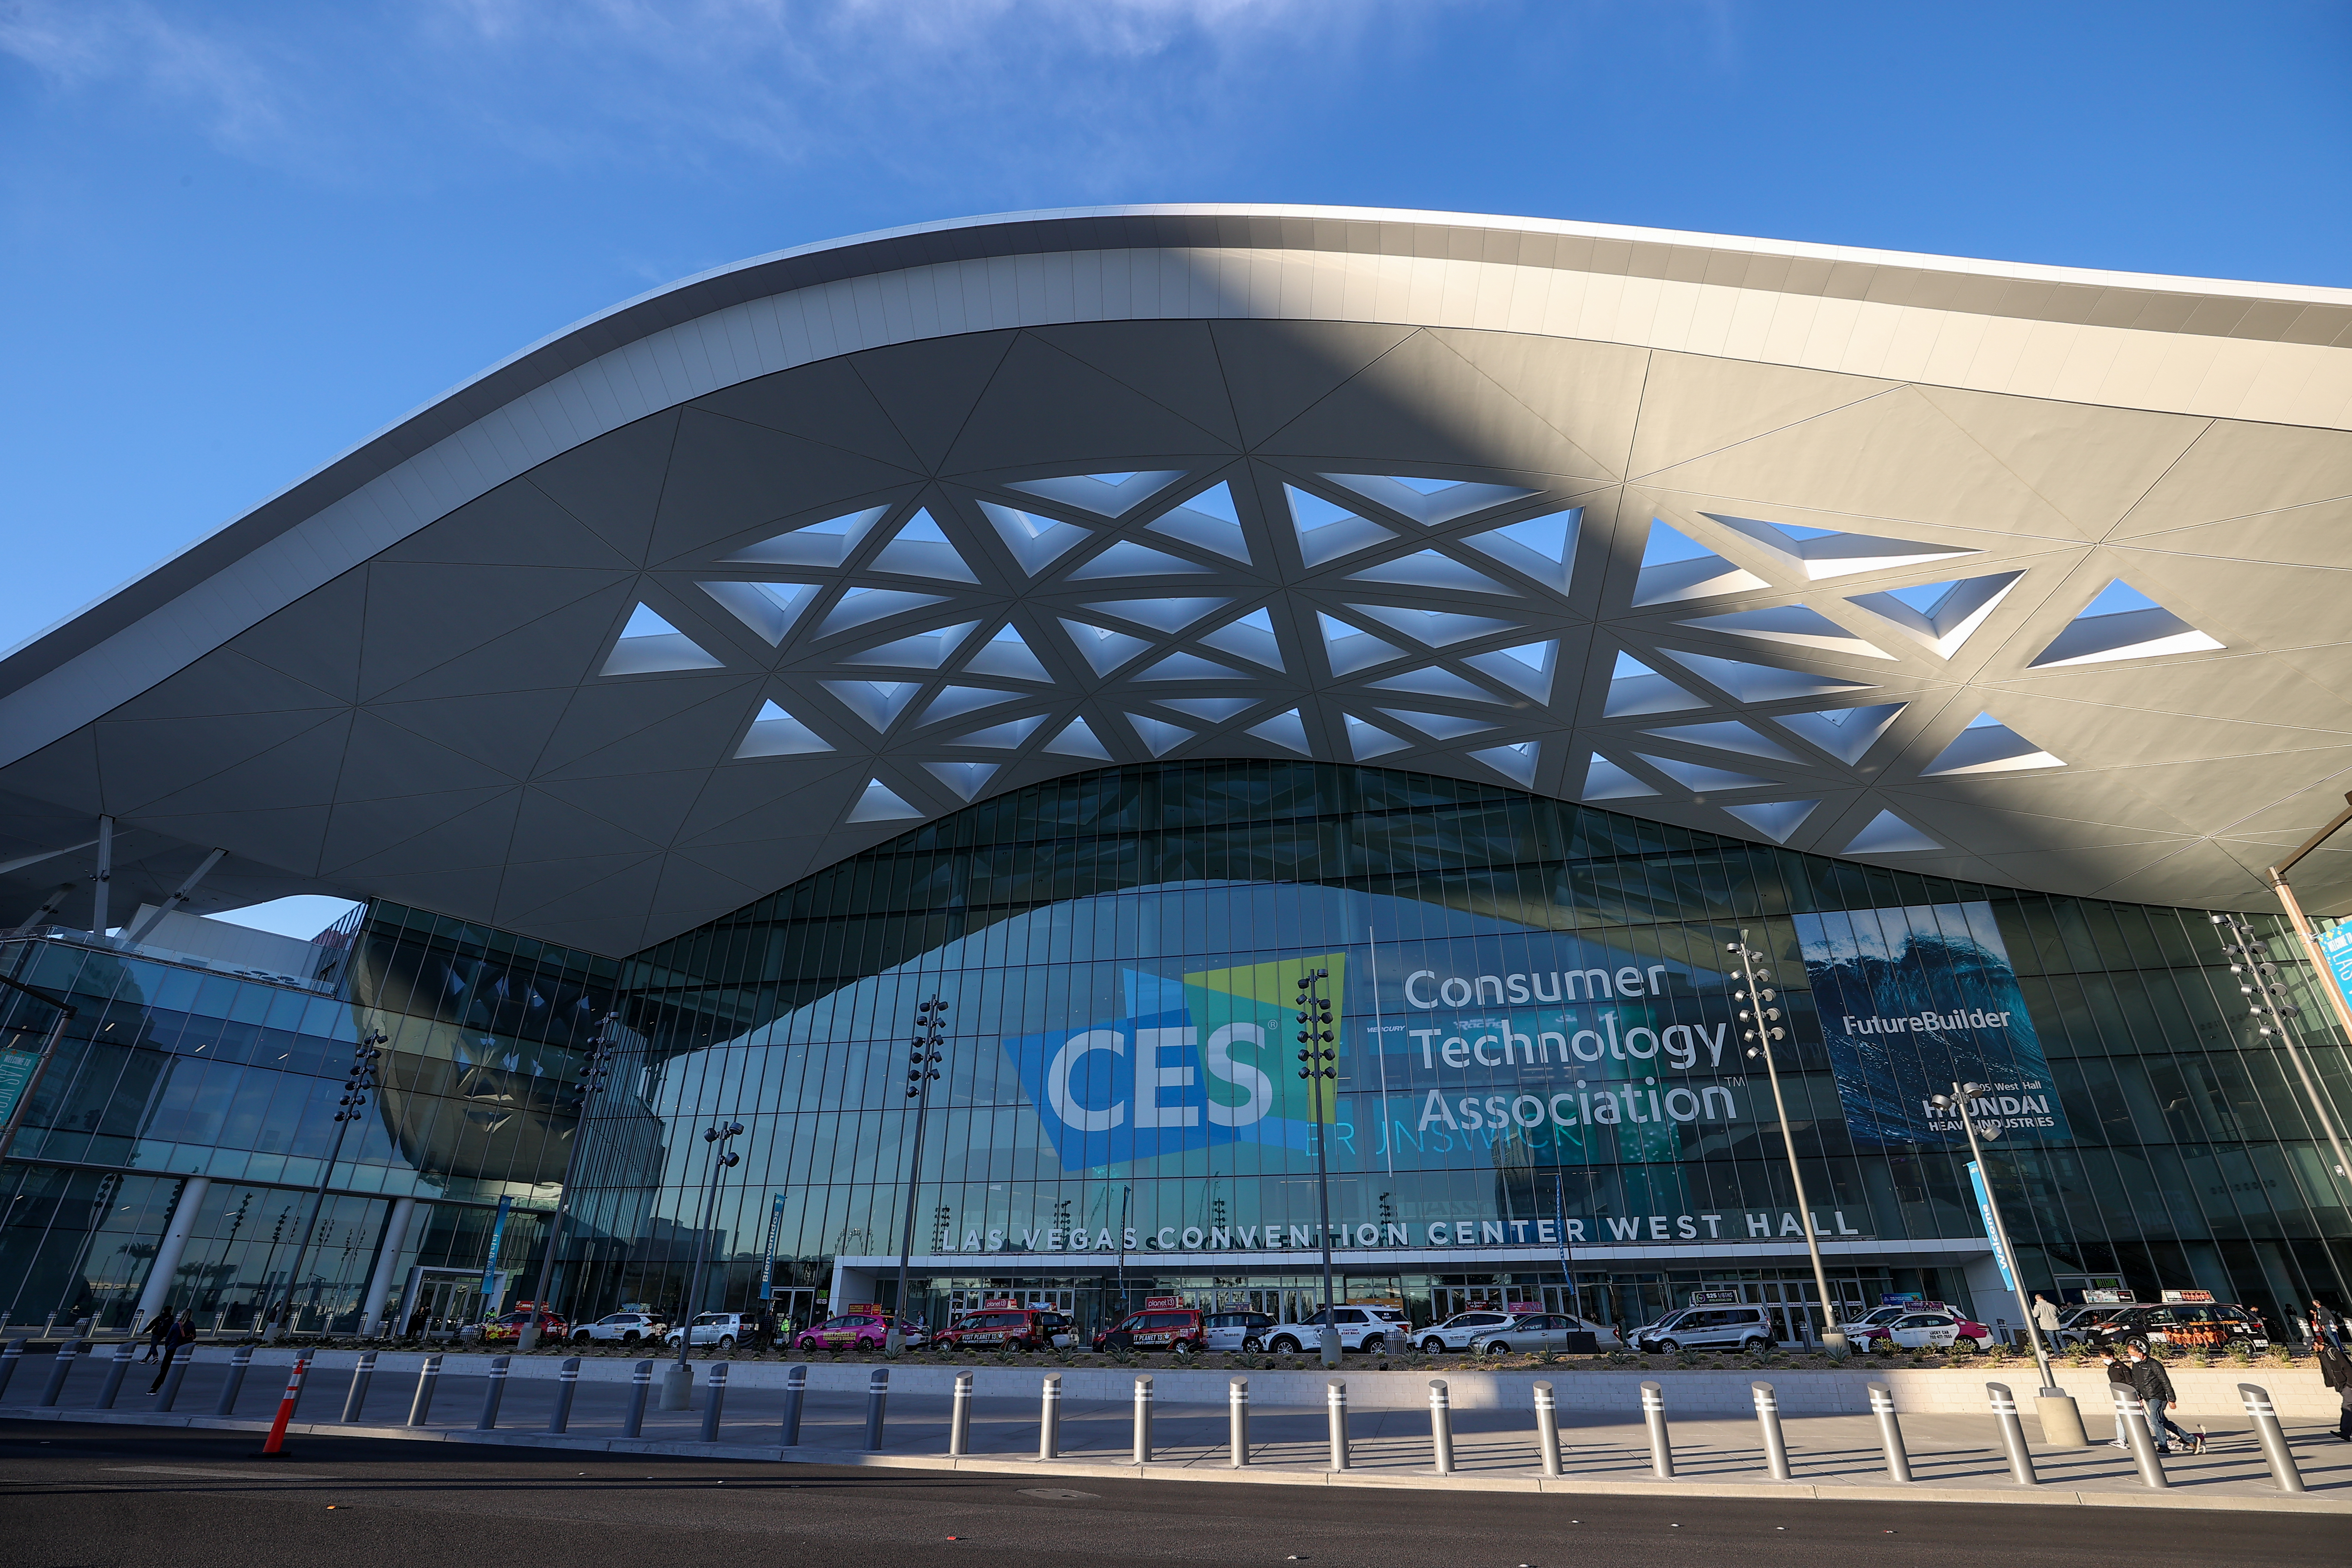 LAS VEGAS - JANUARY 5, CES opens its doors to visitors at the Las Vegas Convention Center in Las Vegas (Nevada), United States on January 5, 2022. (Photo by Tayfun Koskun/Anadolu Agency via Getty Images